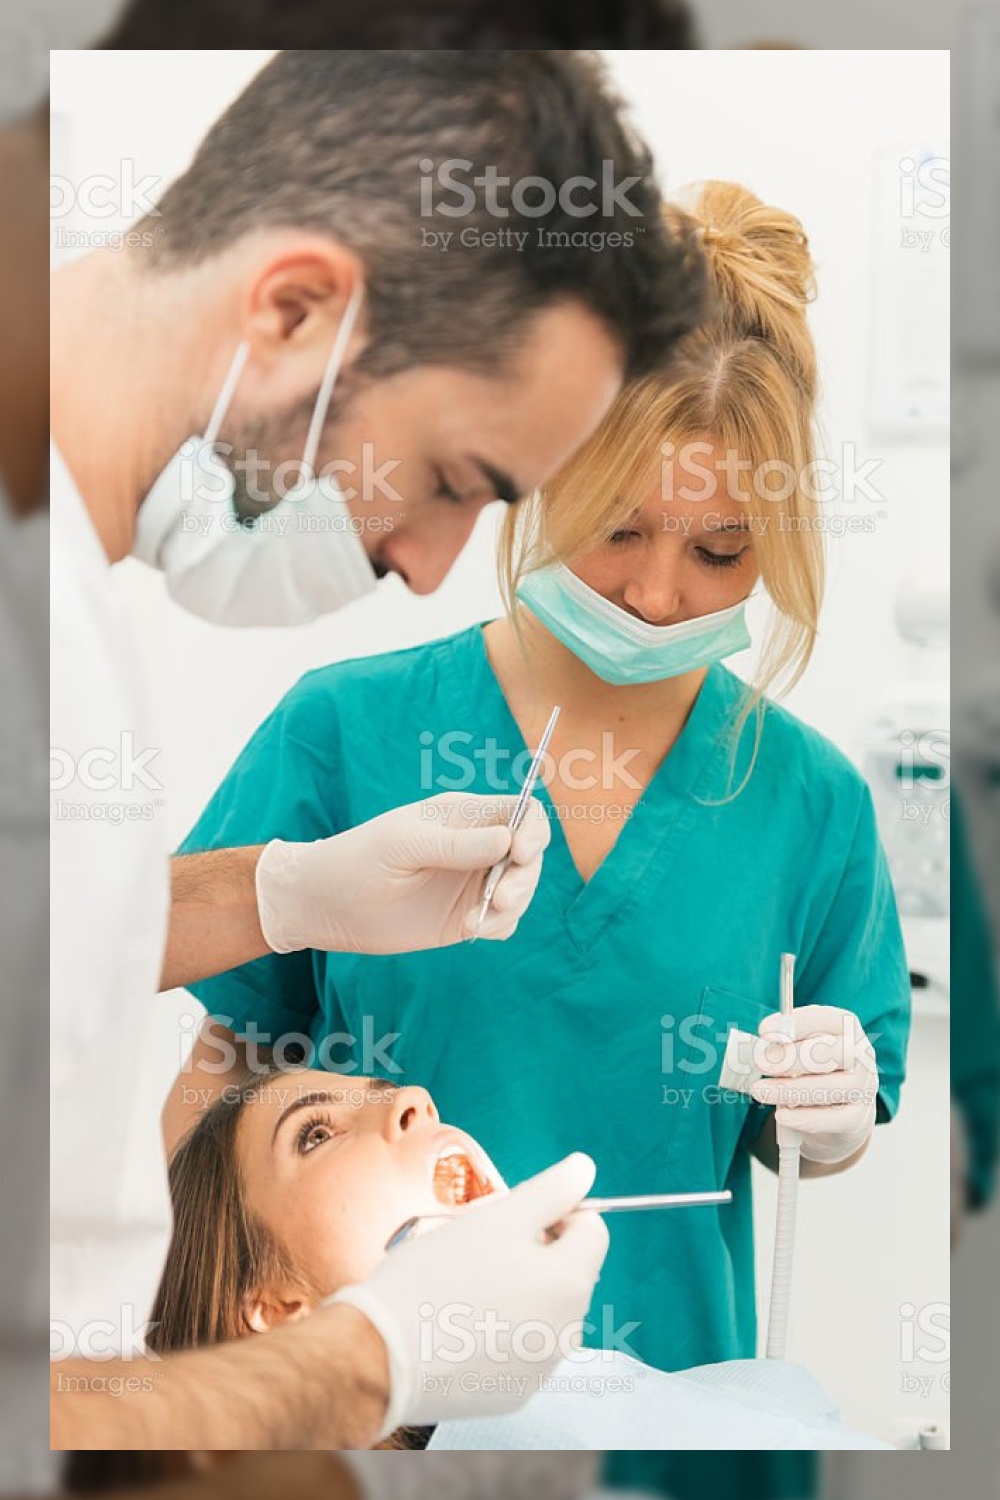 Doctor and the assistant during a surgery stock image stock photo.